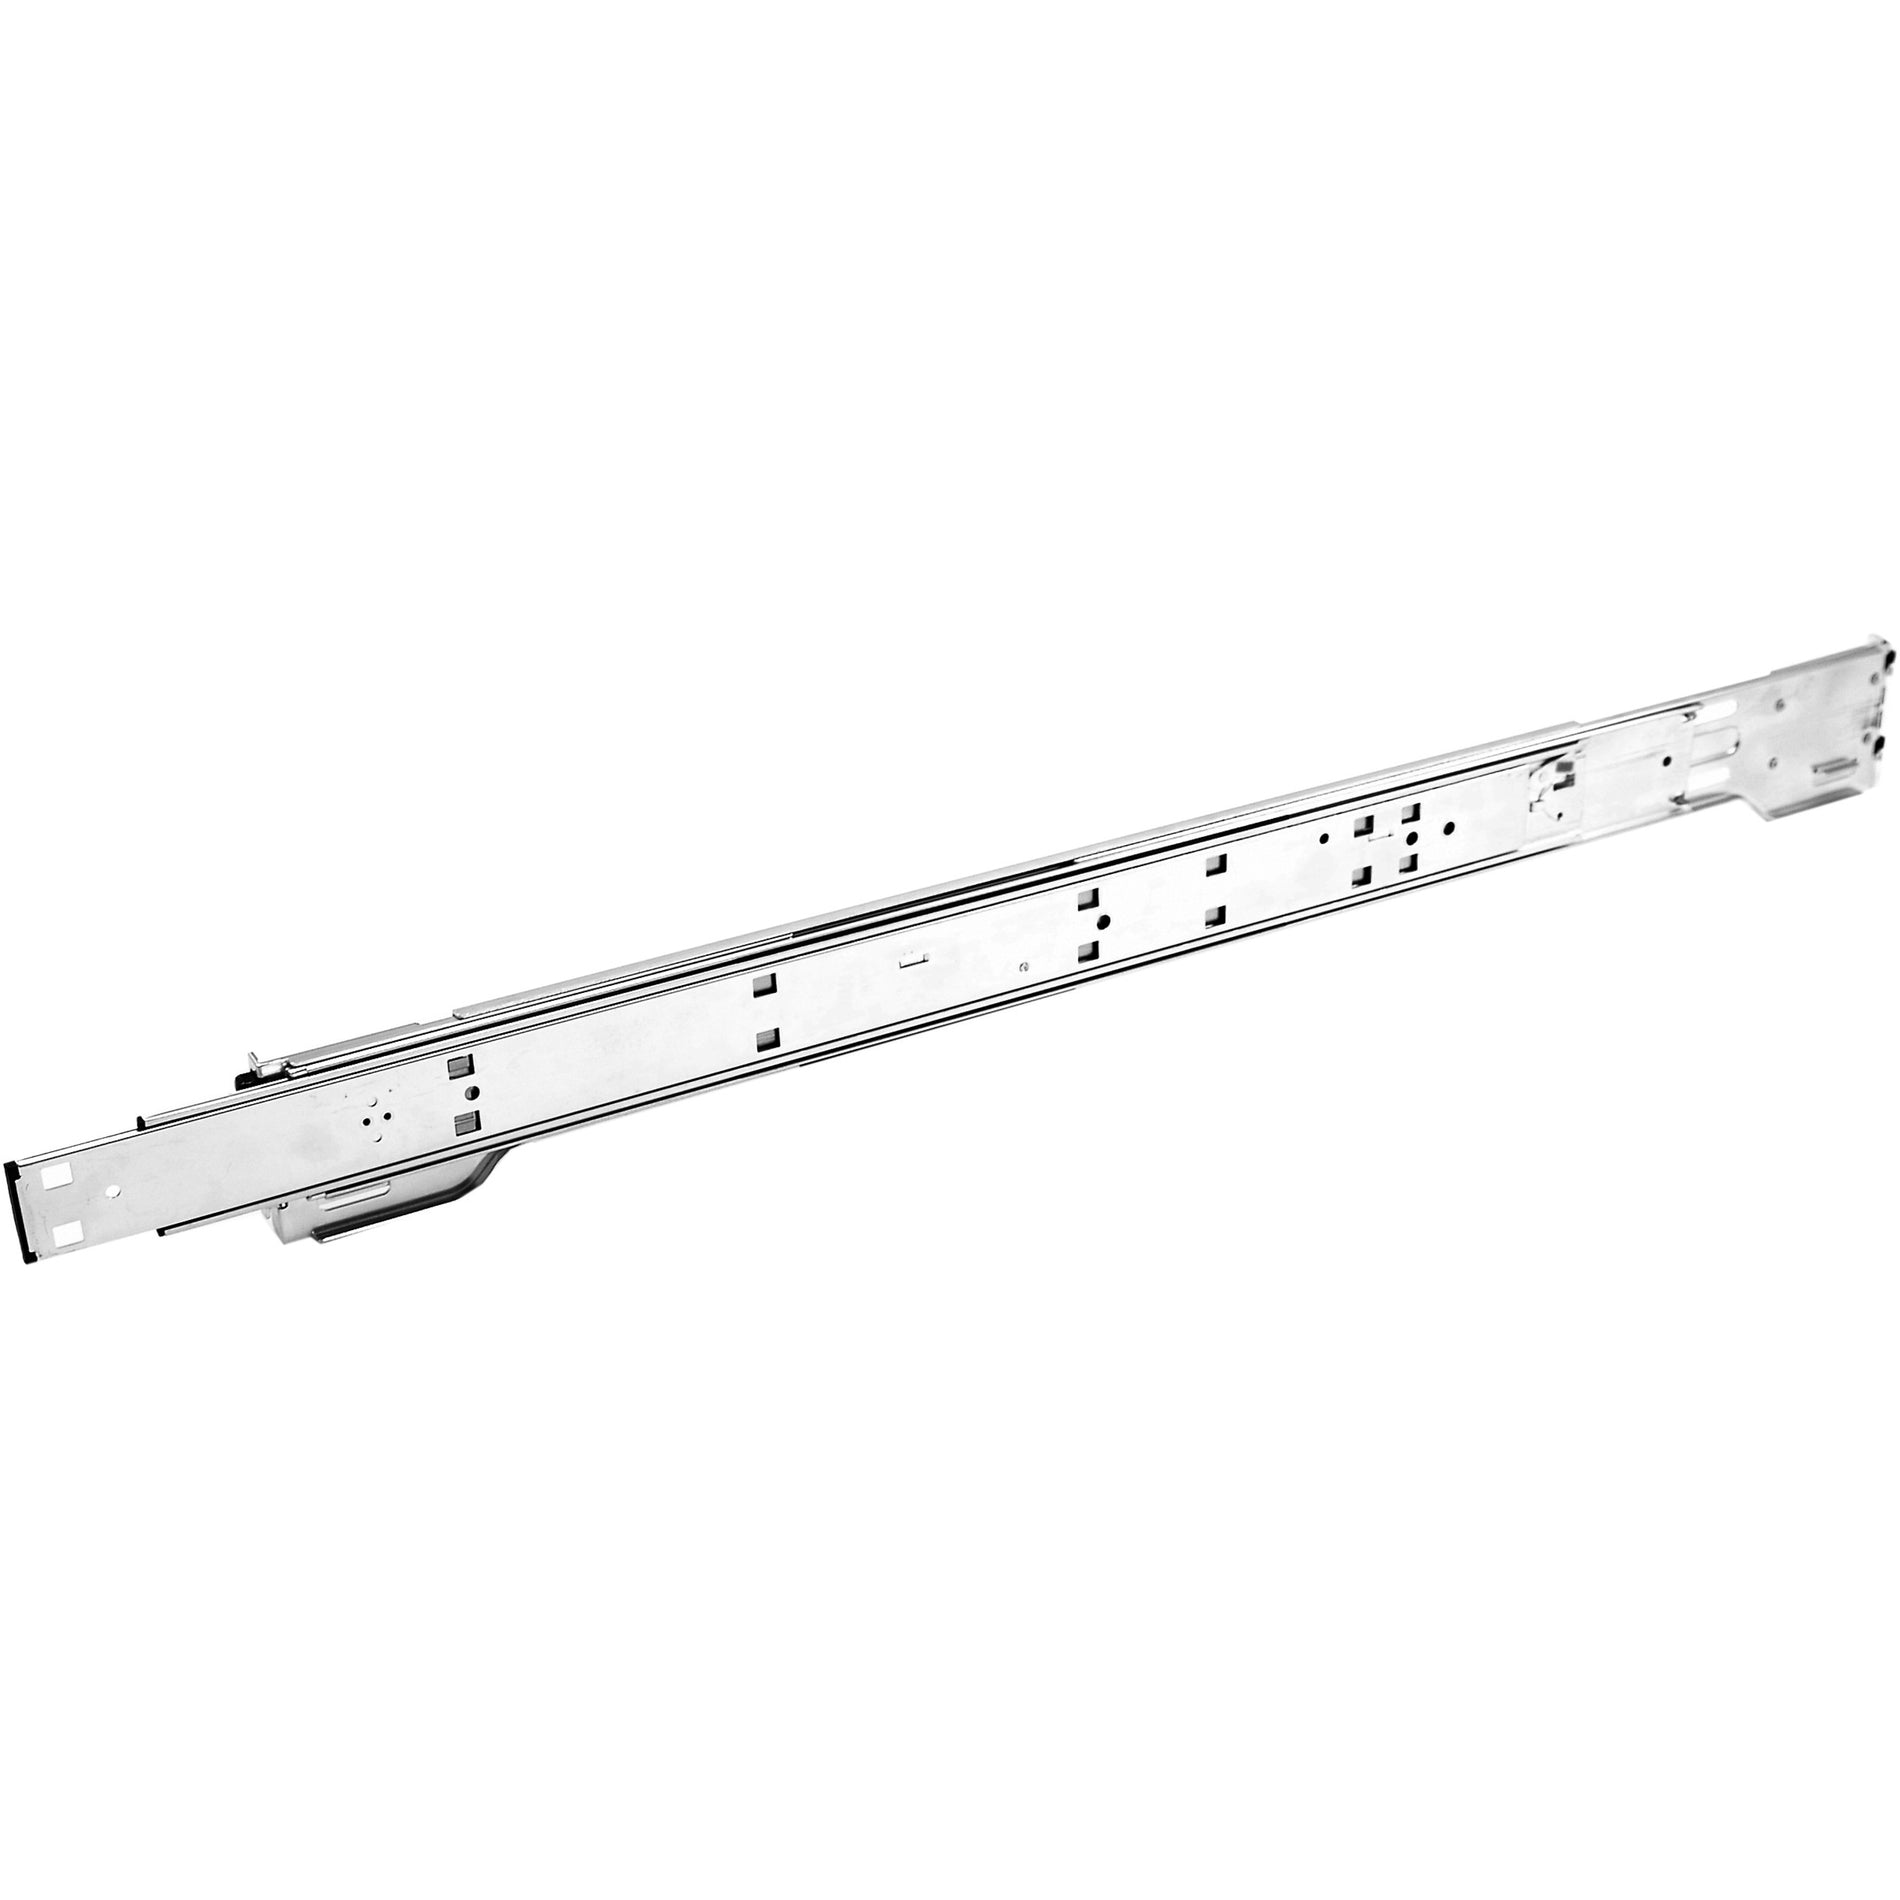 Supermicro MCP-290-00053-0N Mounting Rail, Compatible with Supermicro SuperChassis